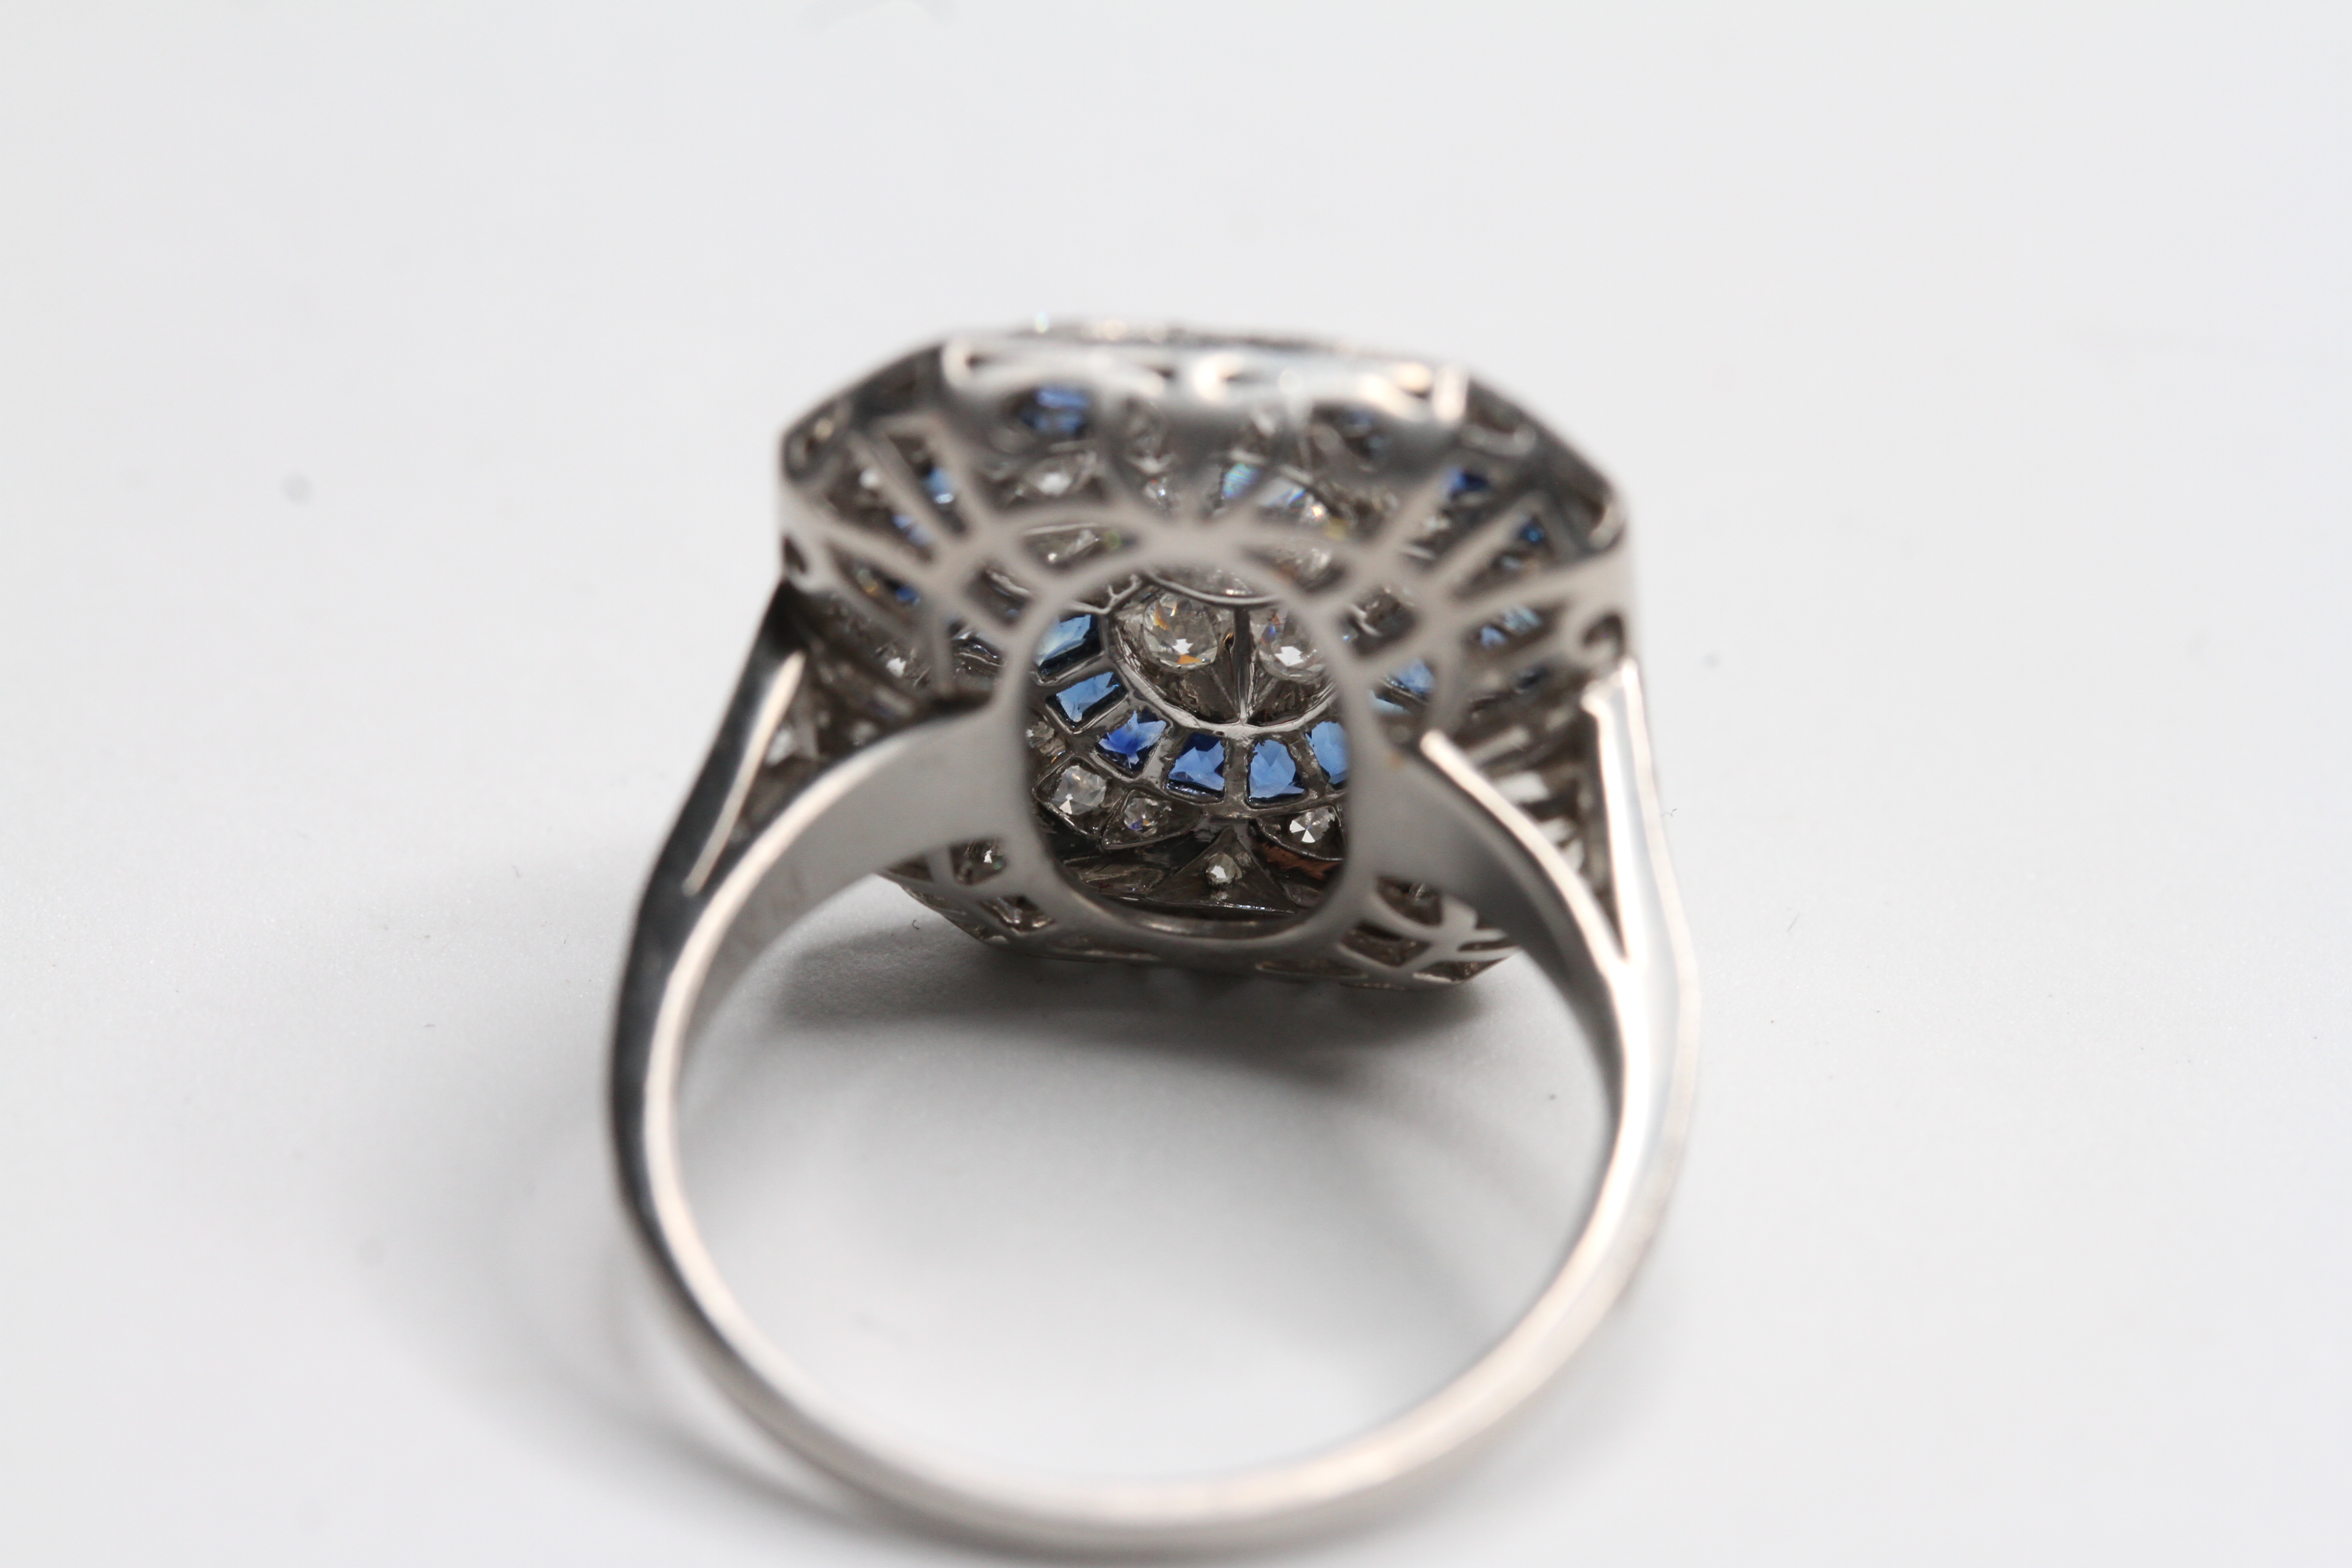 Platinum deco style ring with calibre sapphires and central diamond in 4 petal flower D 1.70ct - Image 2 of 2